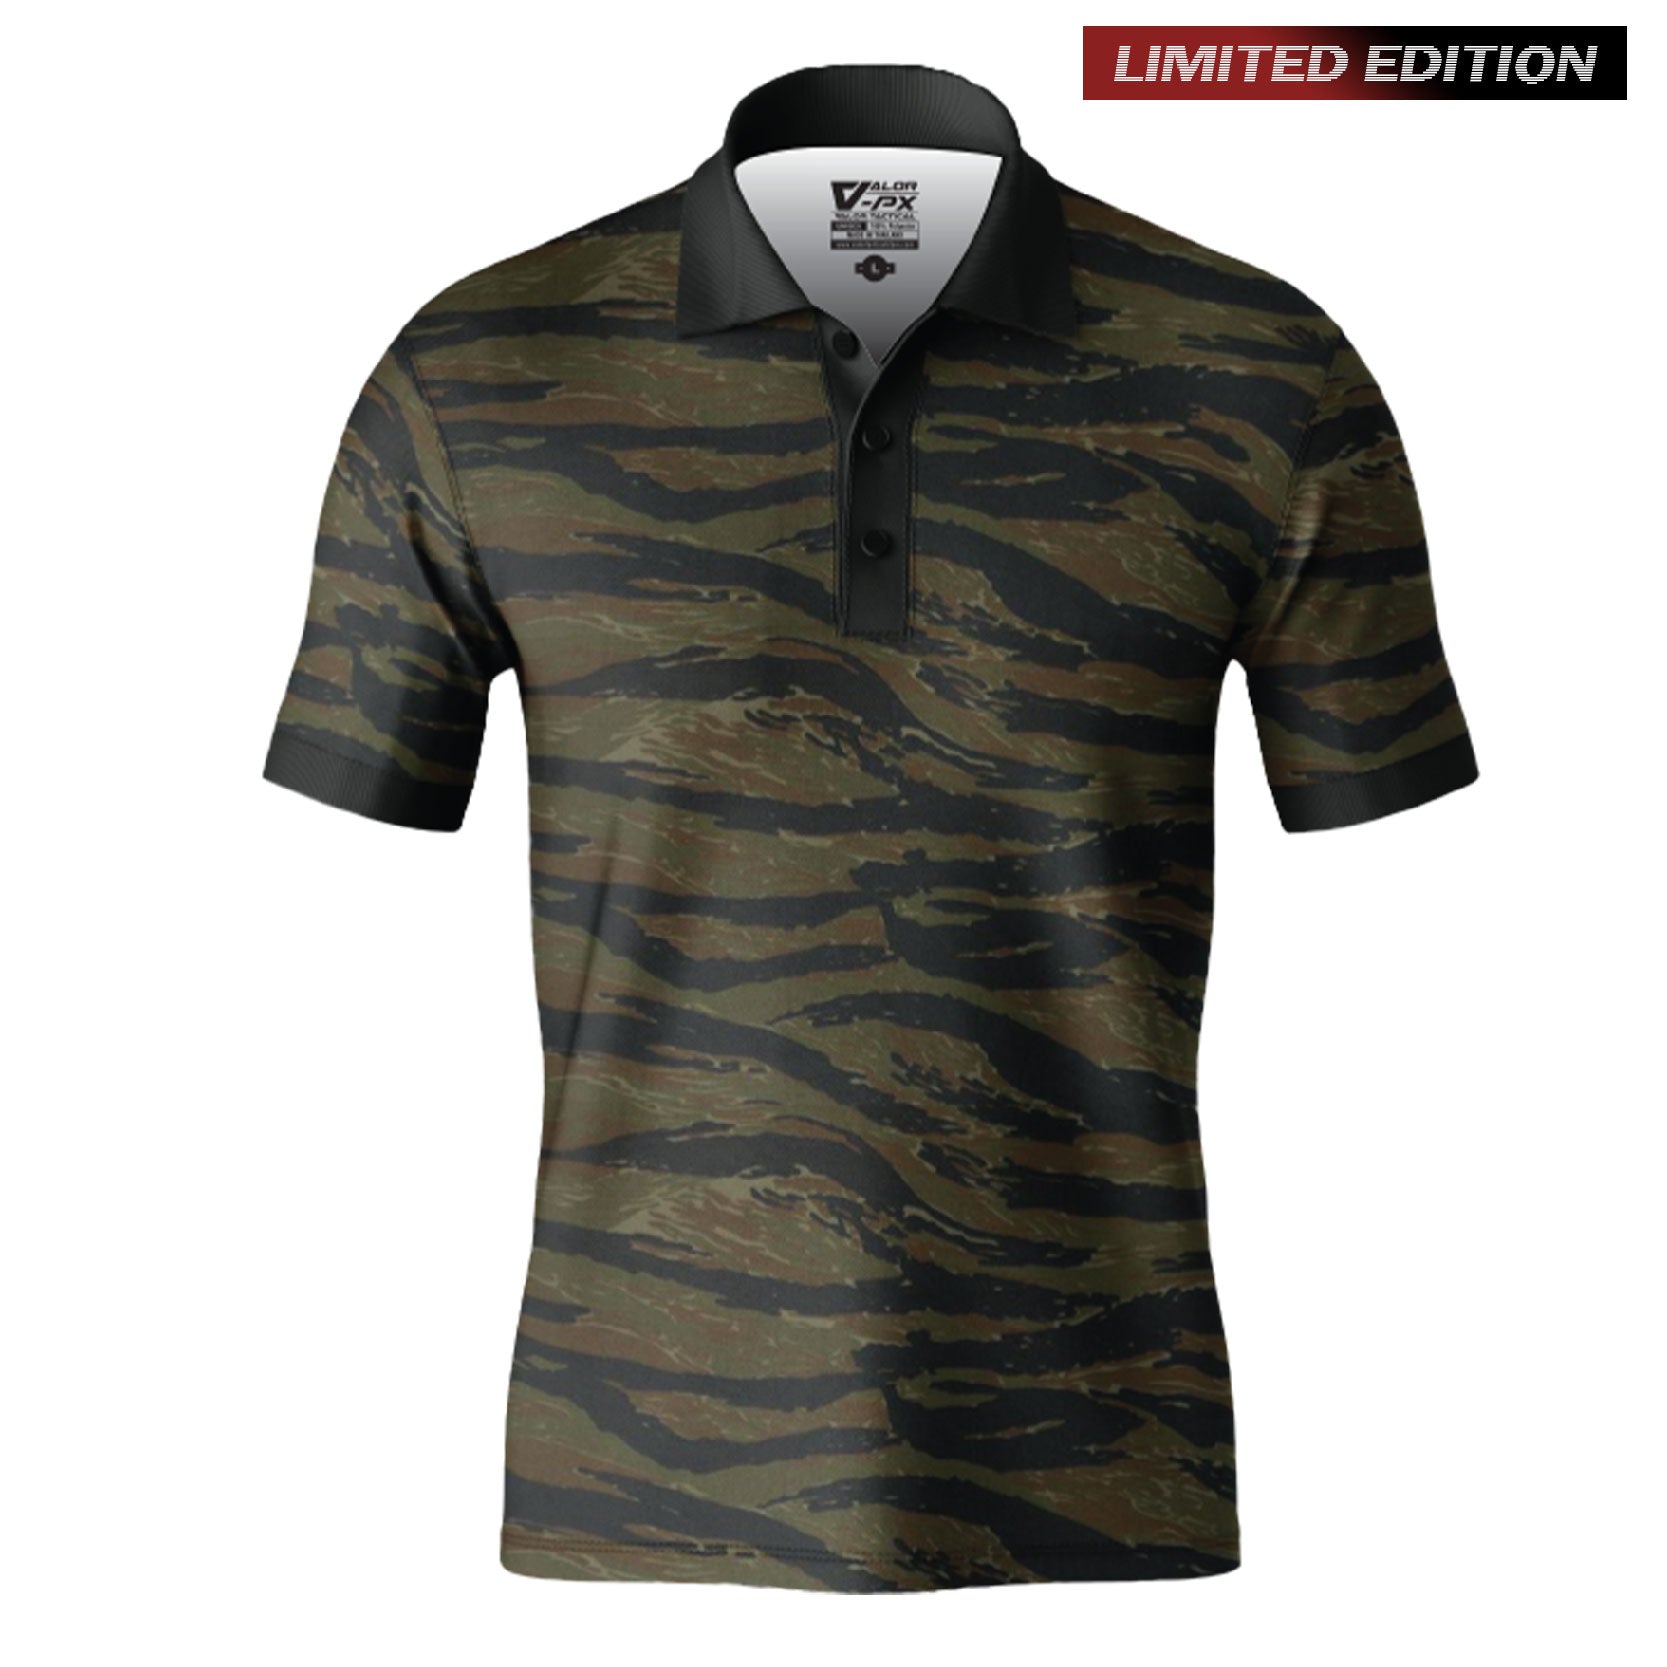 Valor PX - POLO Tiger Stripes ตำรวจพลร่ม Limited Edition